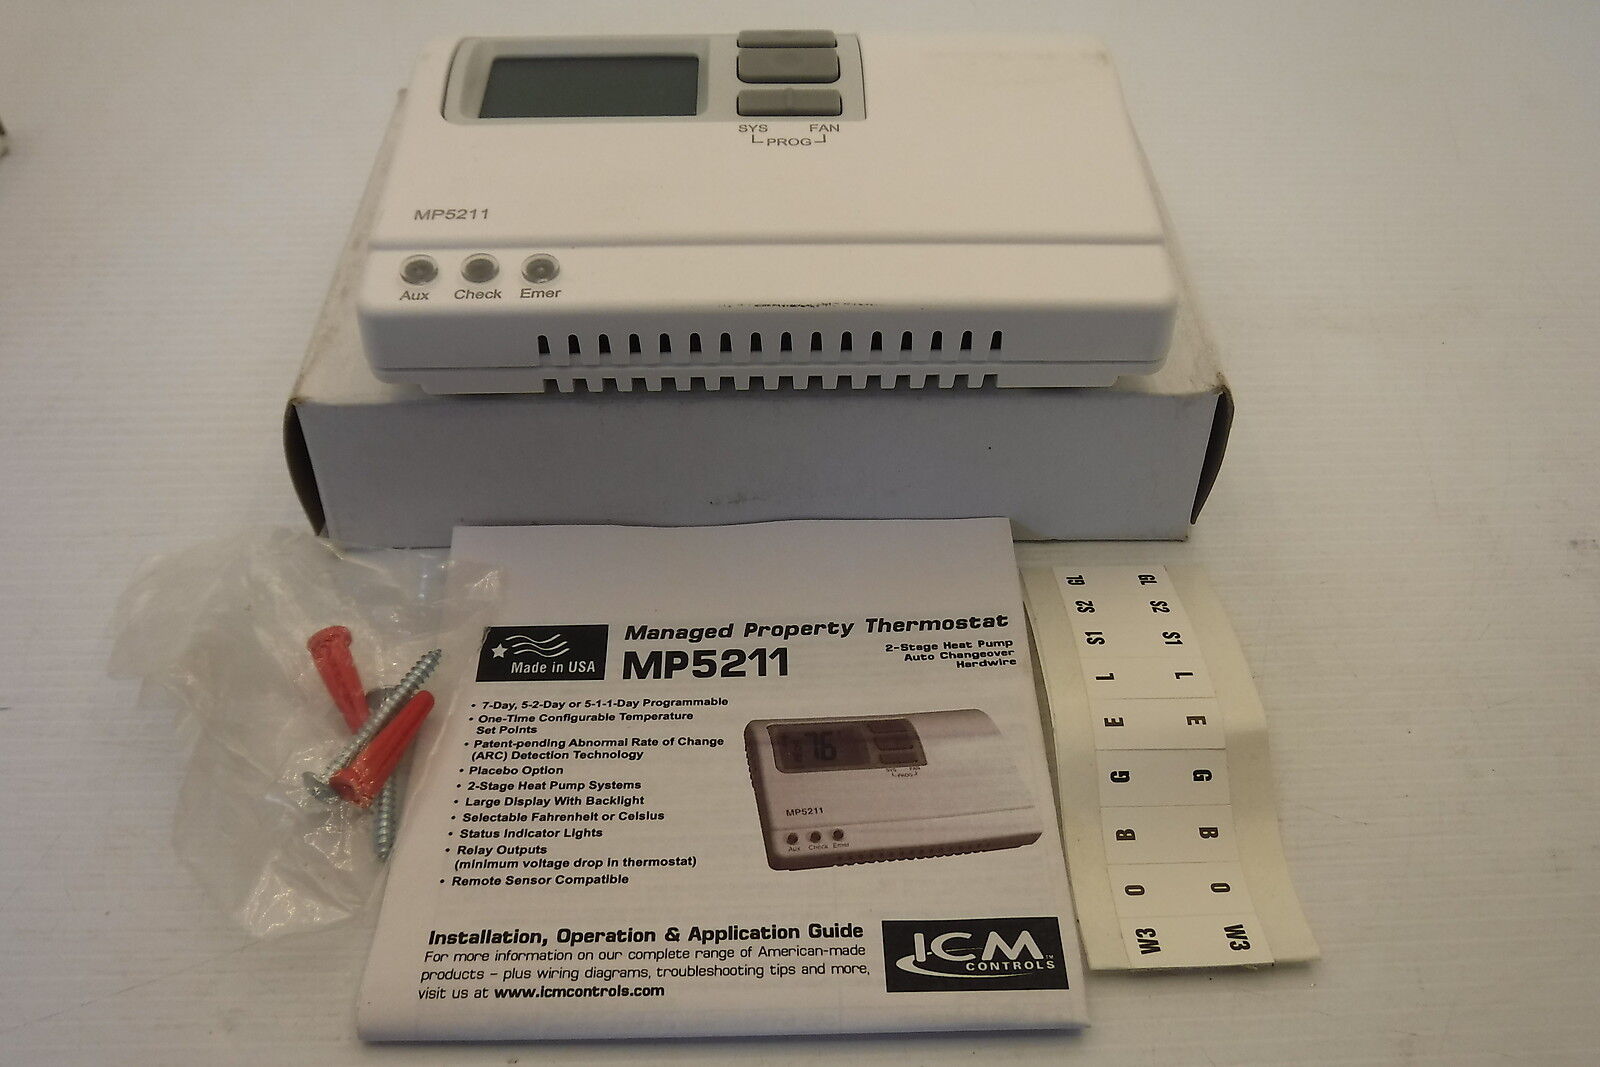 ICM CONTROLS MP5211 Low Voltage Thermostat, 7 Day Programmable NIB